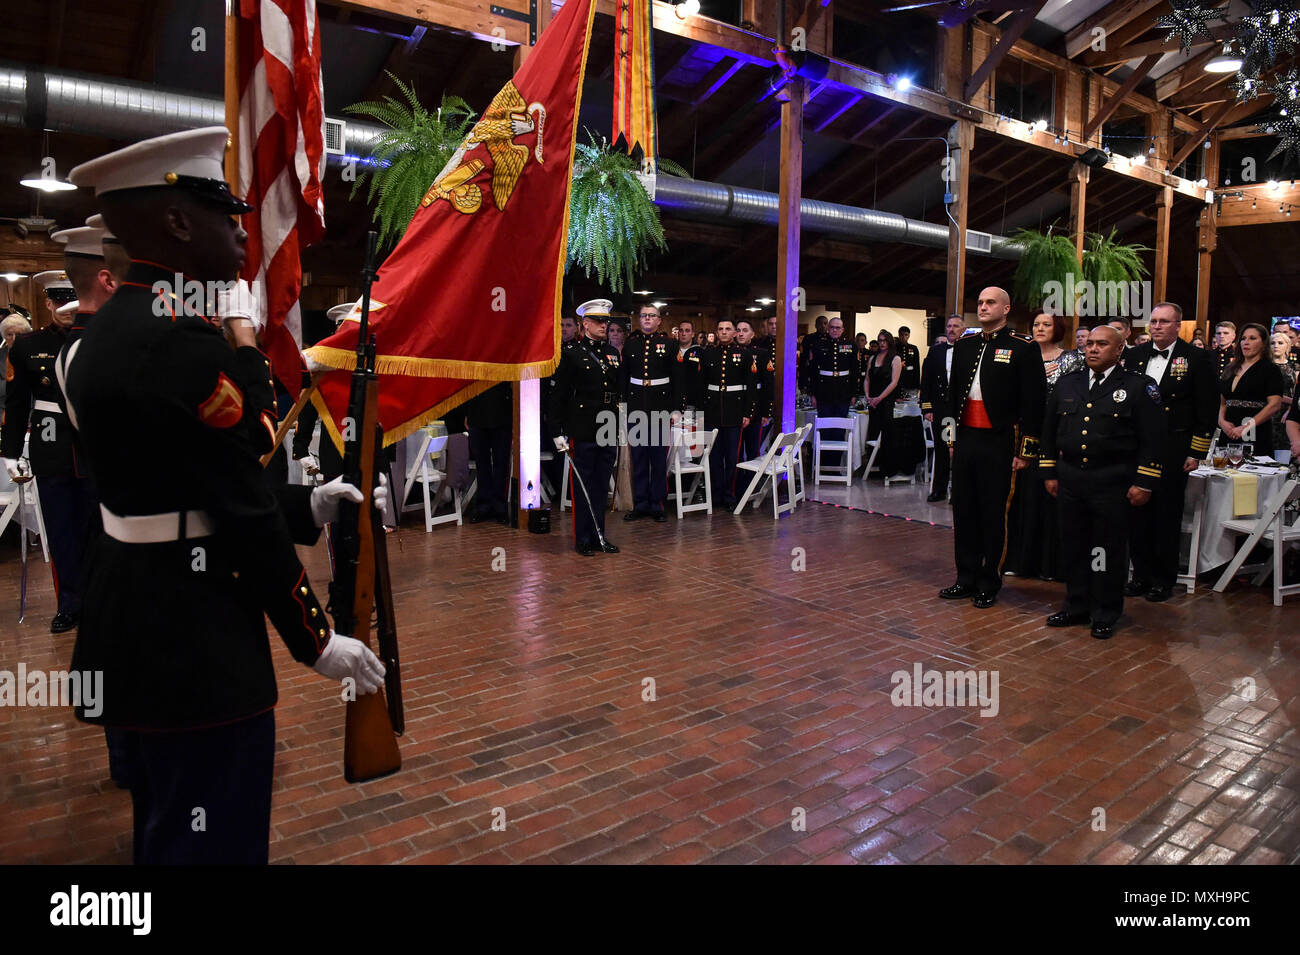 161104-N-OO032-065 POULSBO, Wash. (Nov. 4, 2016) Marine Corps Security Force Battalion (MCSFBn) -Bangor color guard presents the colors during the 241st United States Marine Corps birthday ball hosted by the battalion at the Kiana Lodge. Maj. Gen. John Lejeune issued General Order 47 on November 1, 1921, for Marines to commemorate the establishment of the Continental Marines — November 10, 1775. (U.S. Navy photo by Petty Officer 1st Class Cory Asato/Released) Stock Photo